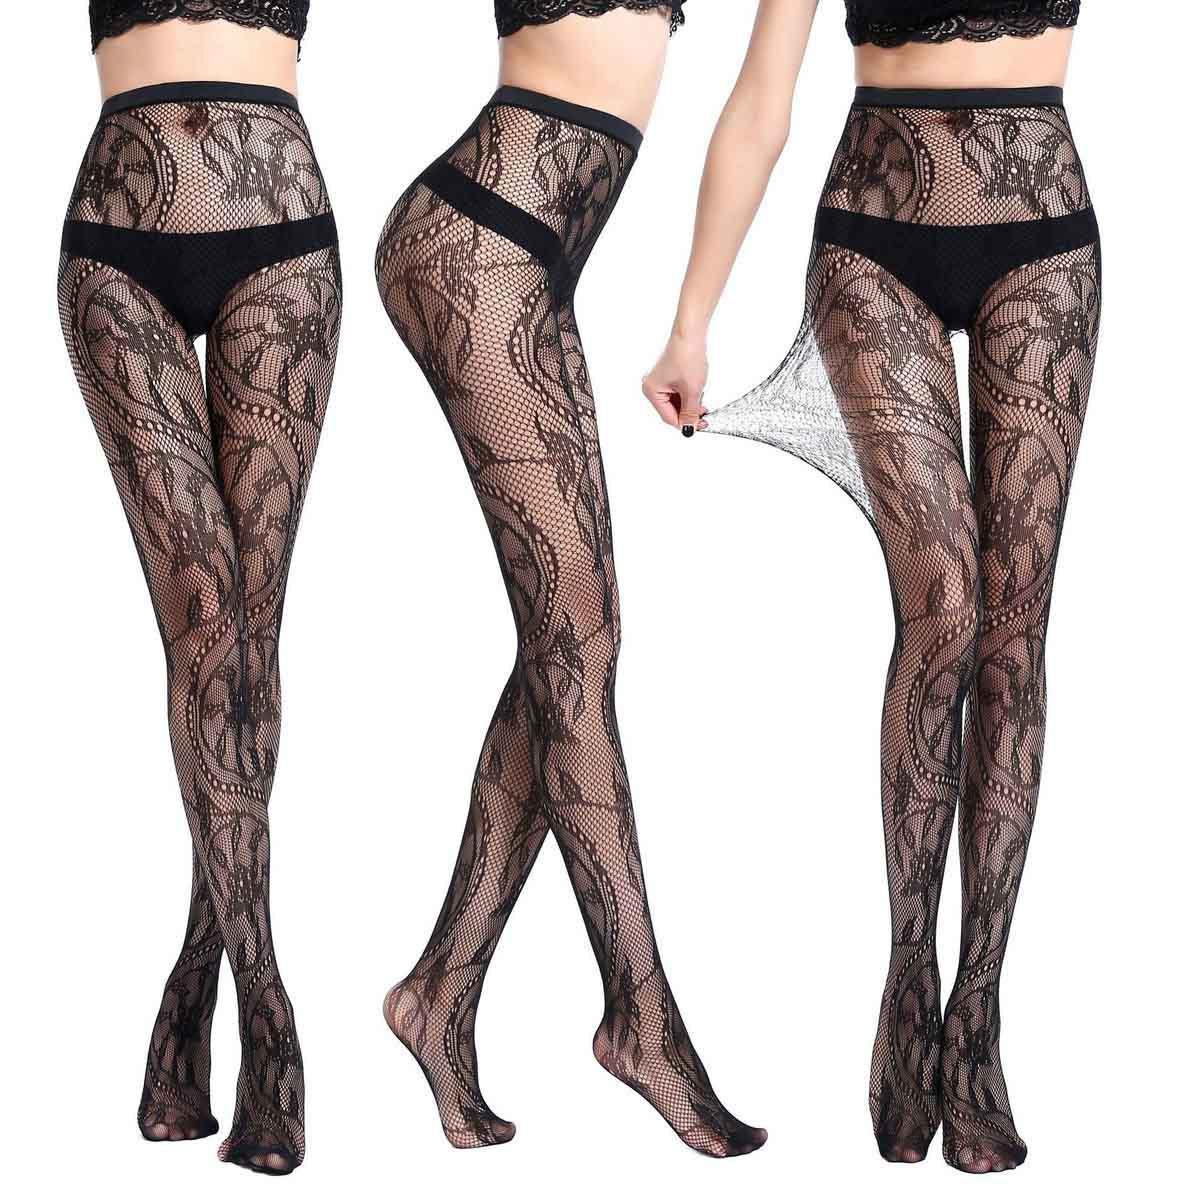 Fishnet Pantyhose Tights Patterned Stockings Waist High